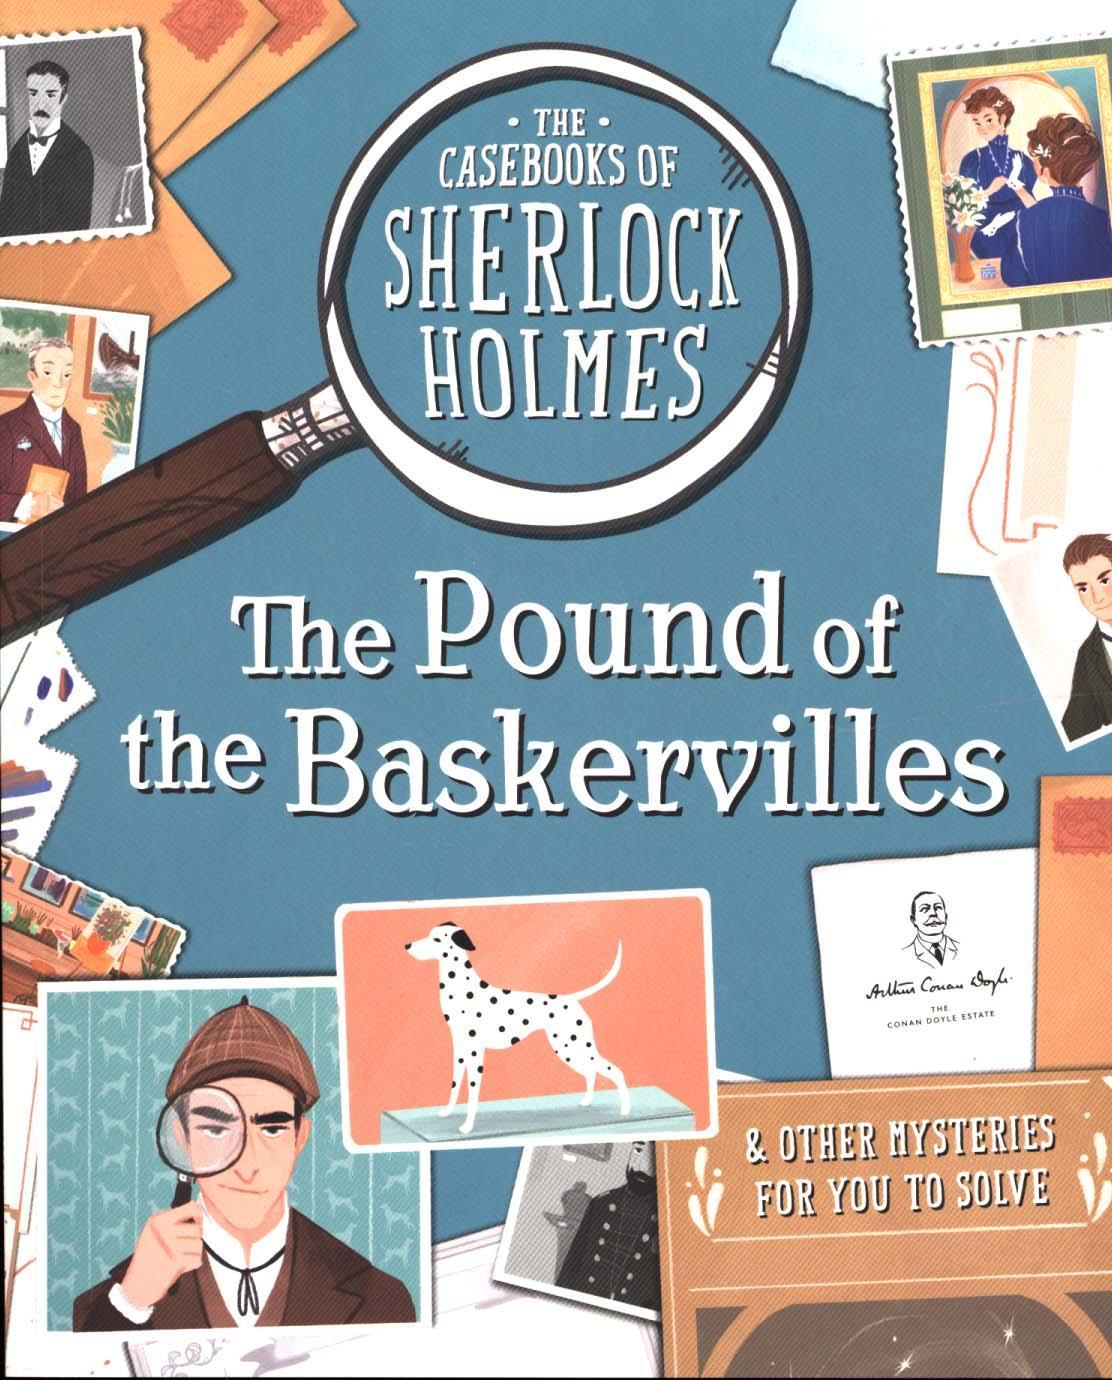 Casebooks of Sherlock Holmes The Pound of the Baskervilles